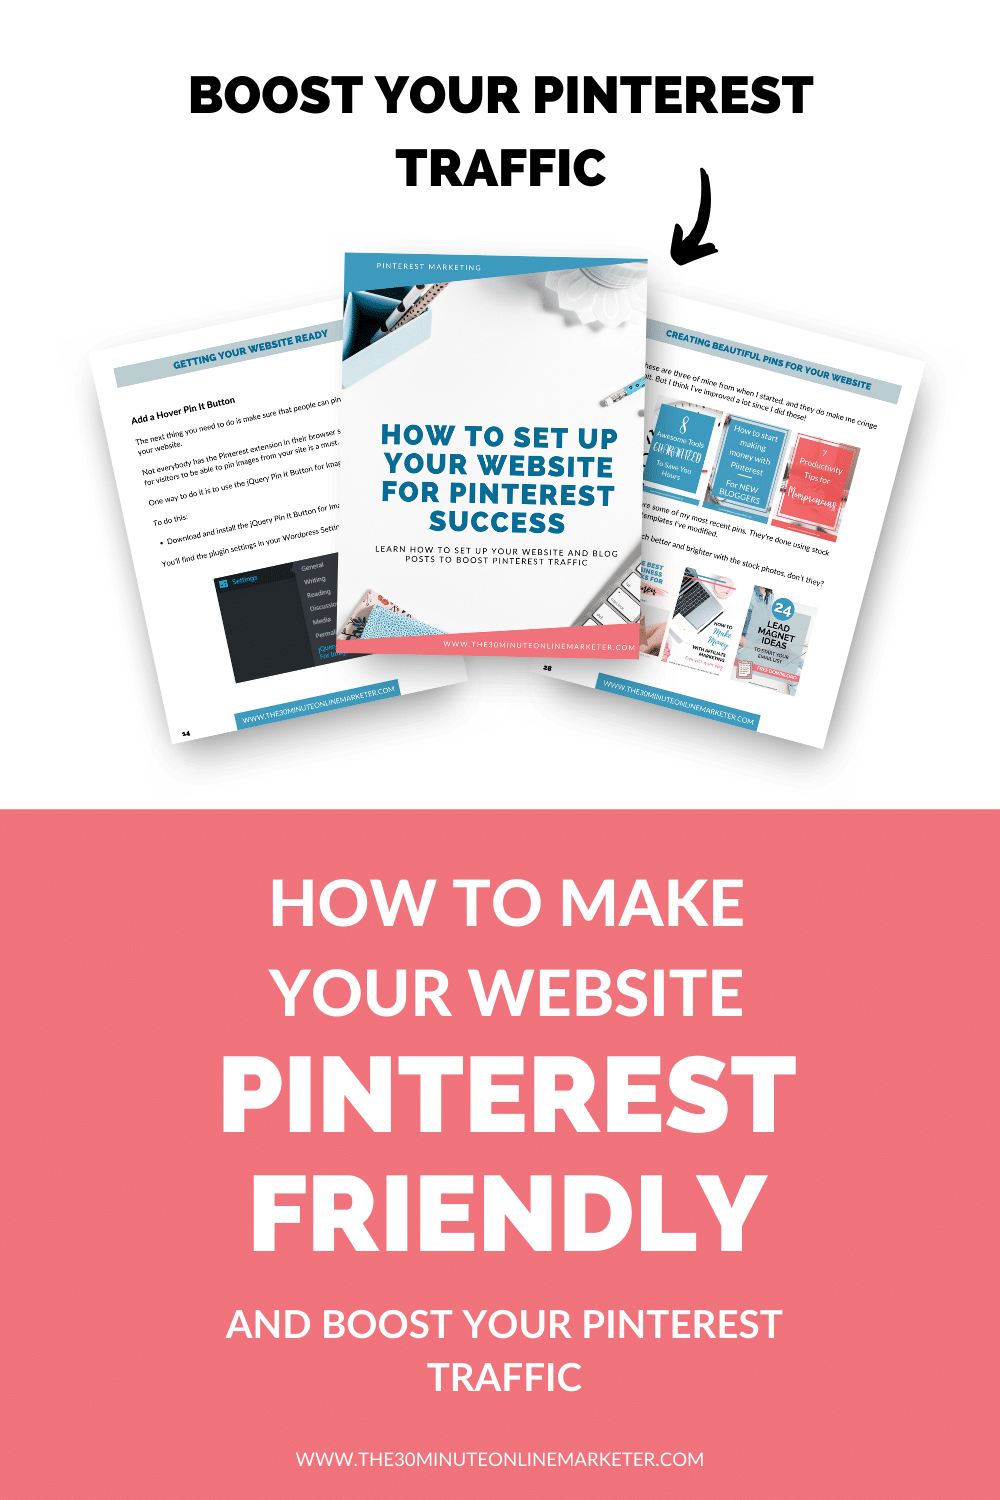 How to set up your website for Pinterest success